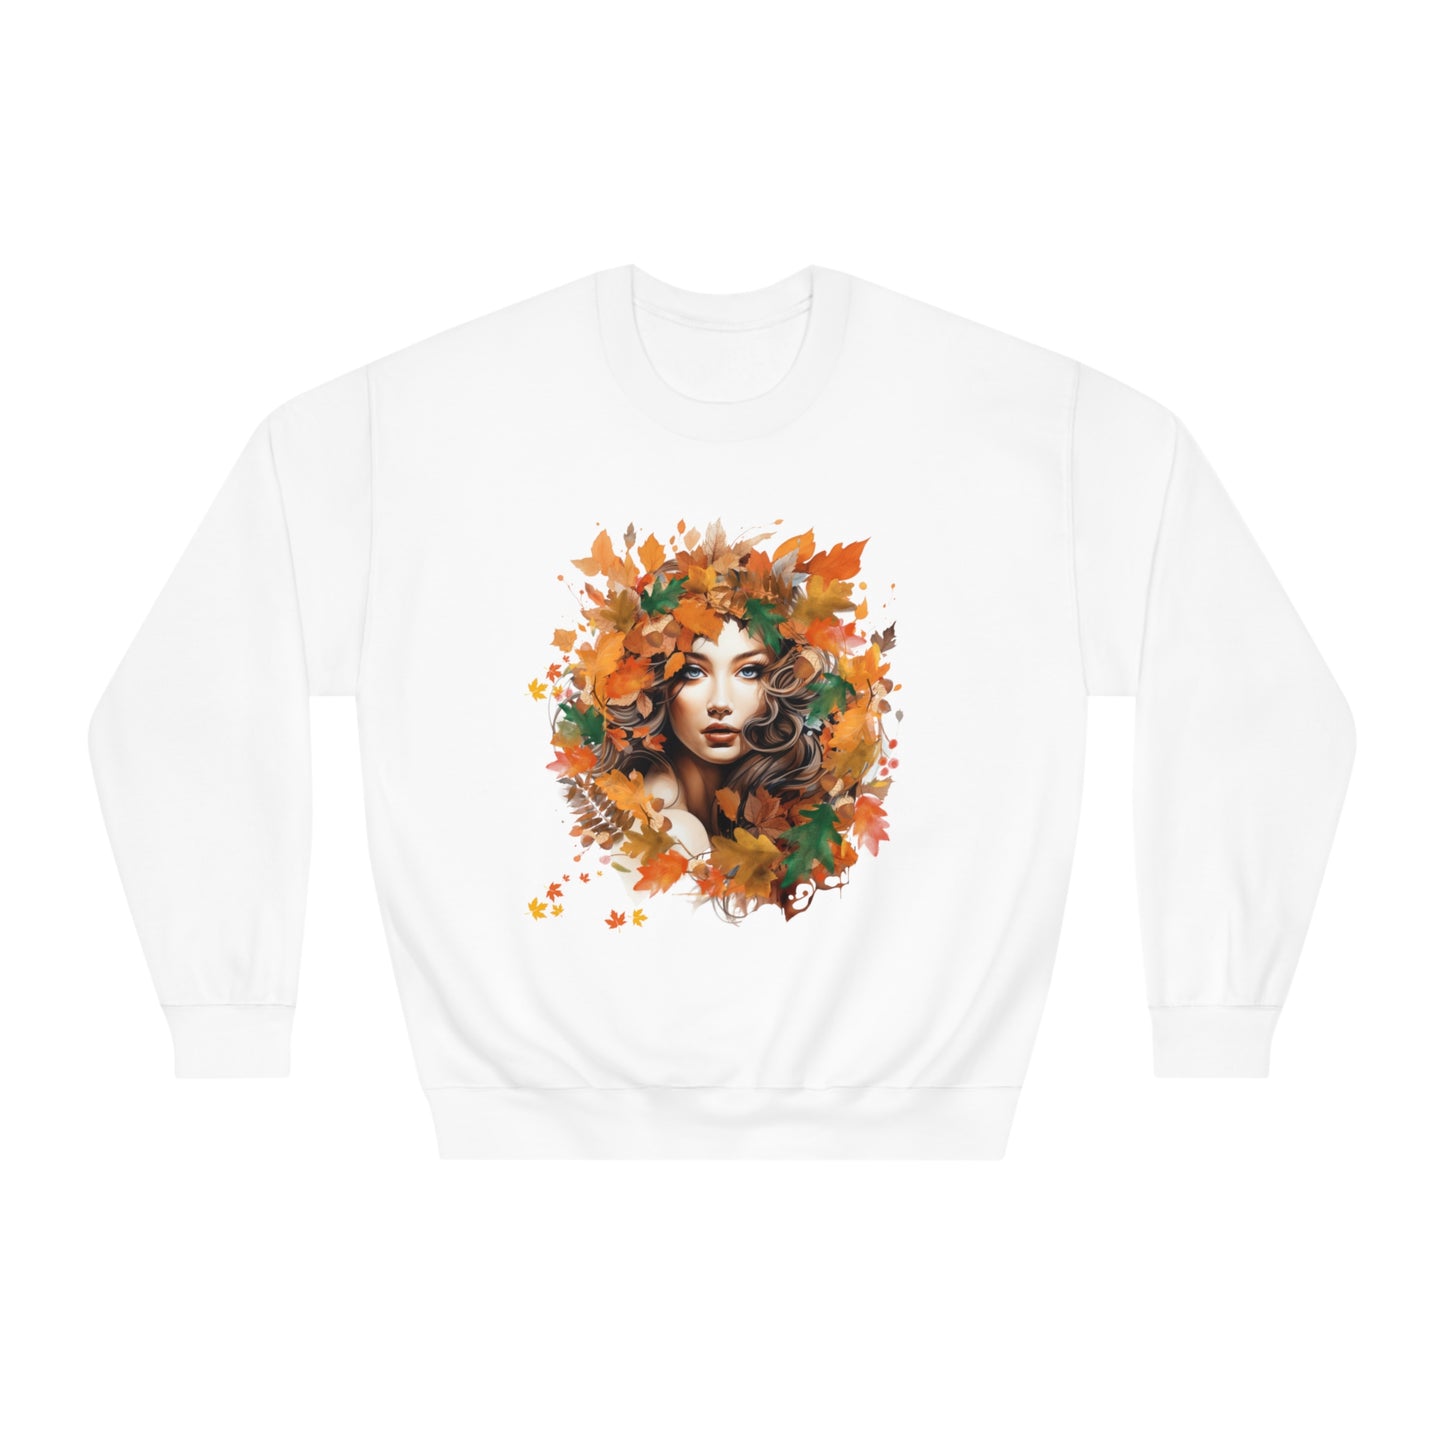 Whimsical Dreams in Autumn Hues: Romantic Dreamy Female Surrounded by Autumn Leaves Sweatshirt - Fairycore, Forestcore, Cottagecore-inspired Fashion Sweatshirt White S 